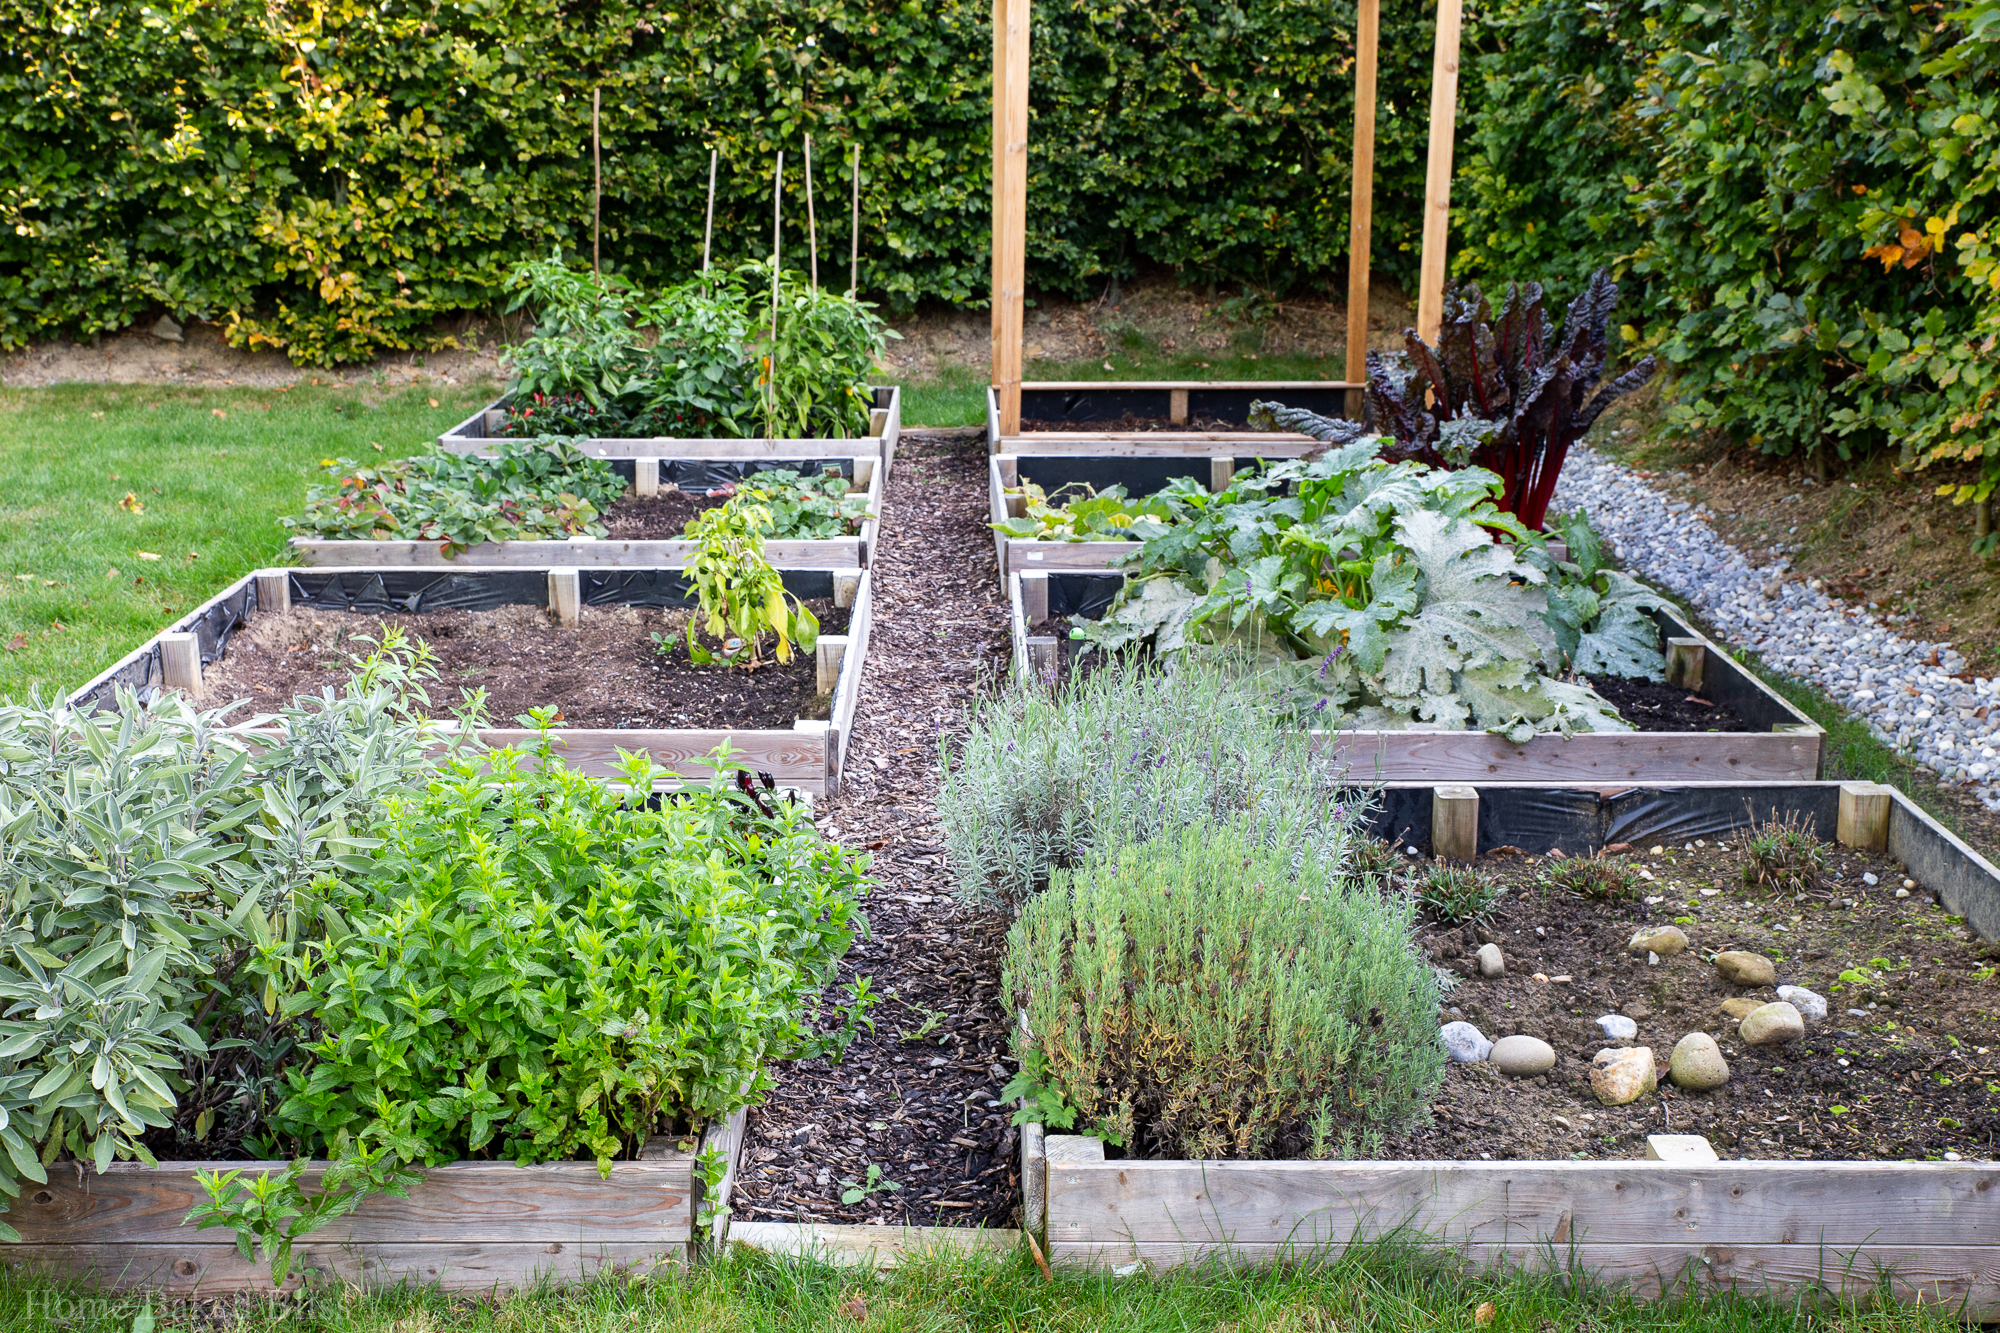 Overview of the vegetable beds